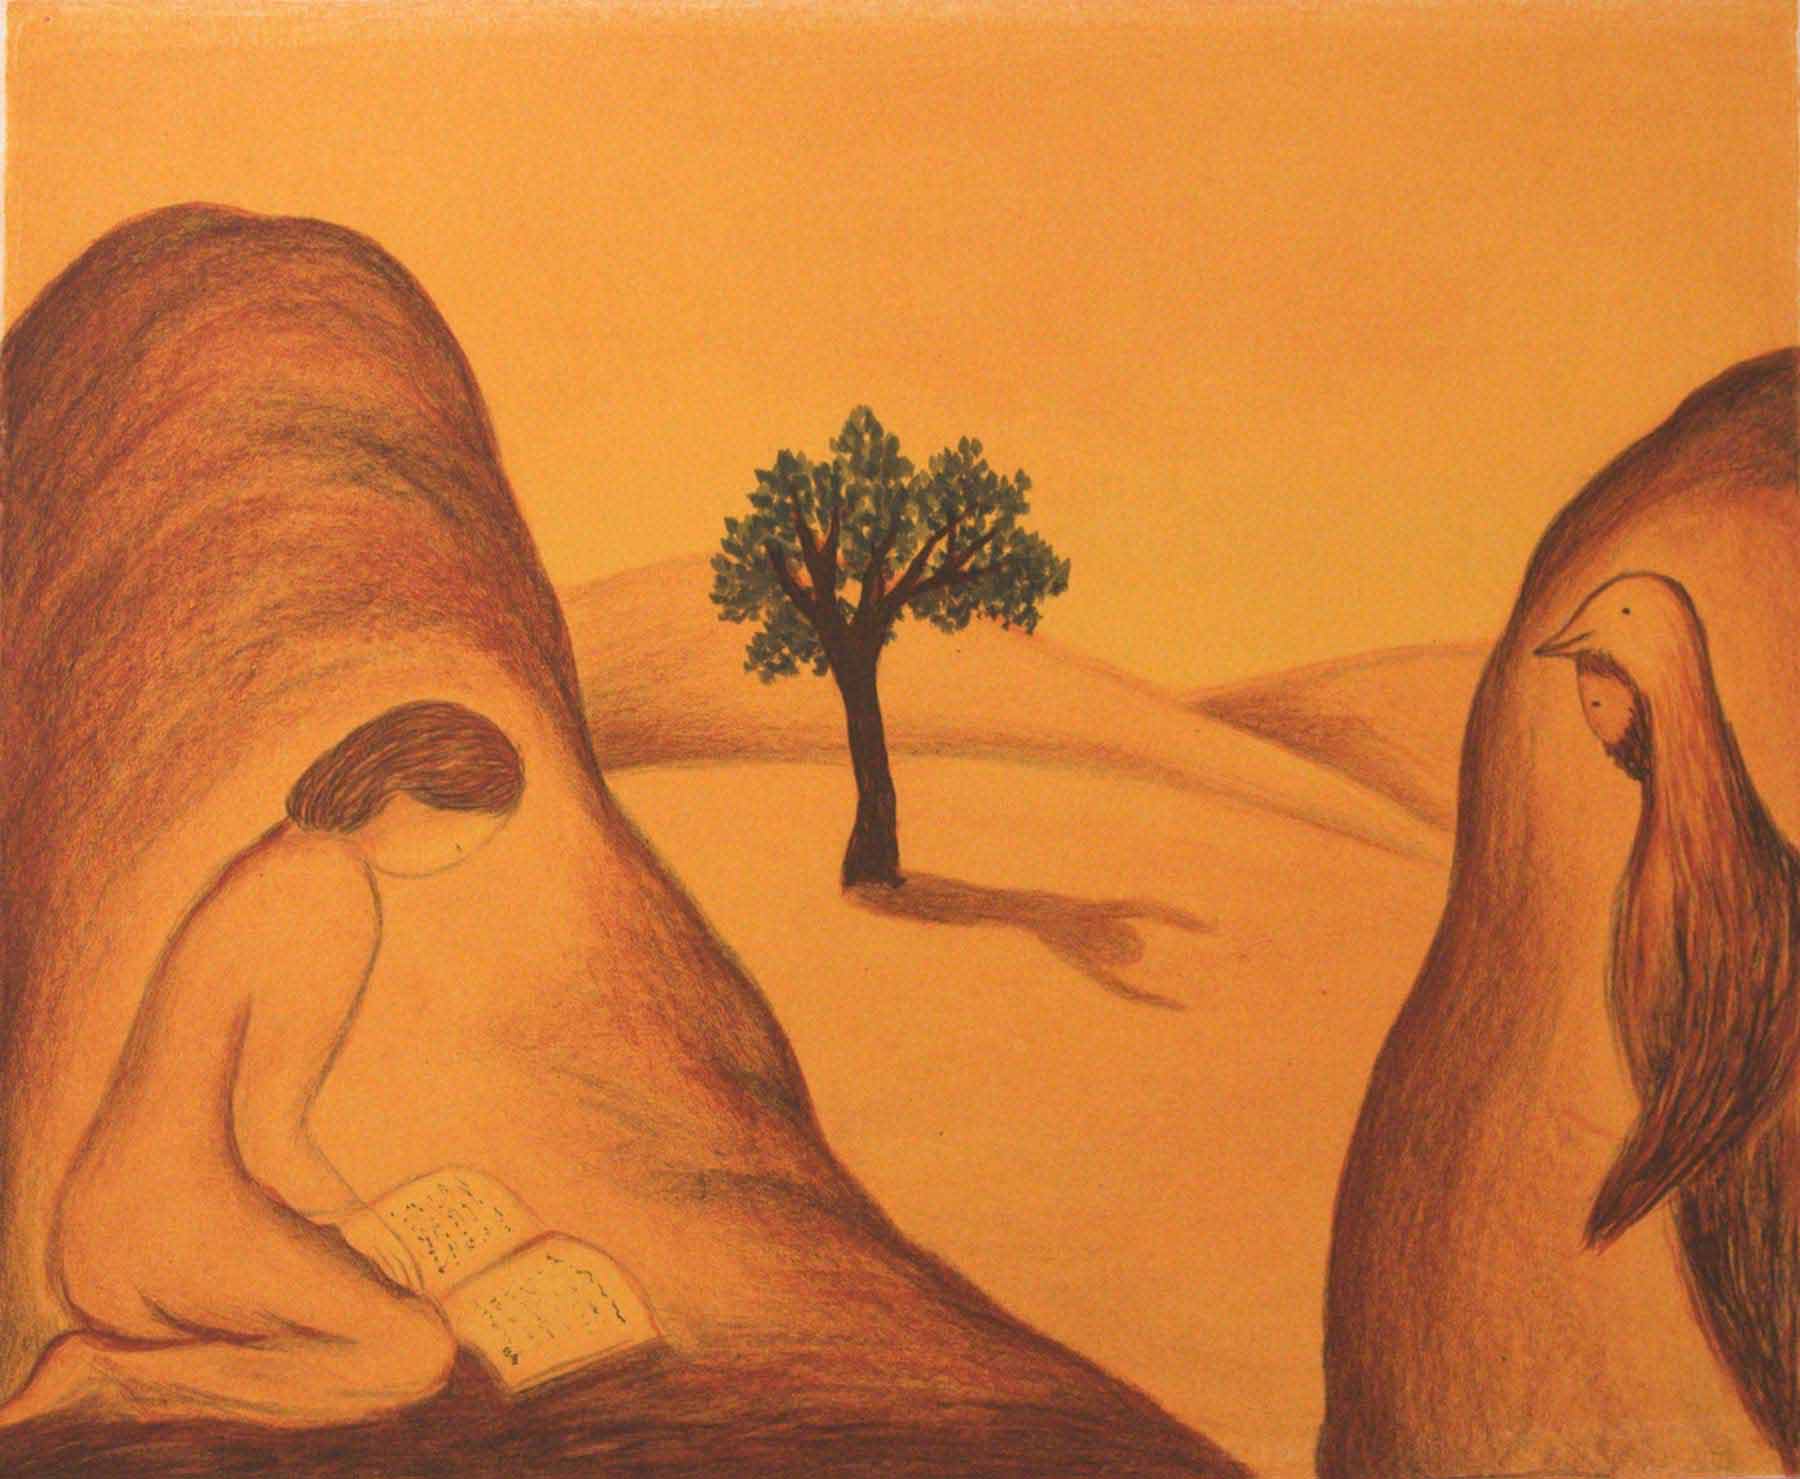 <em>Valley of Hope</em>, 1997. Lithography, 16 x 20 in. (41 x 51 cm)